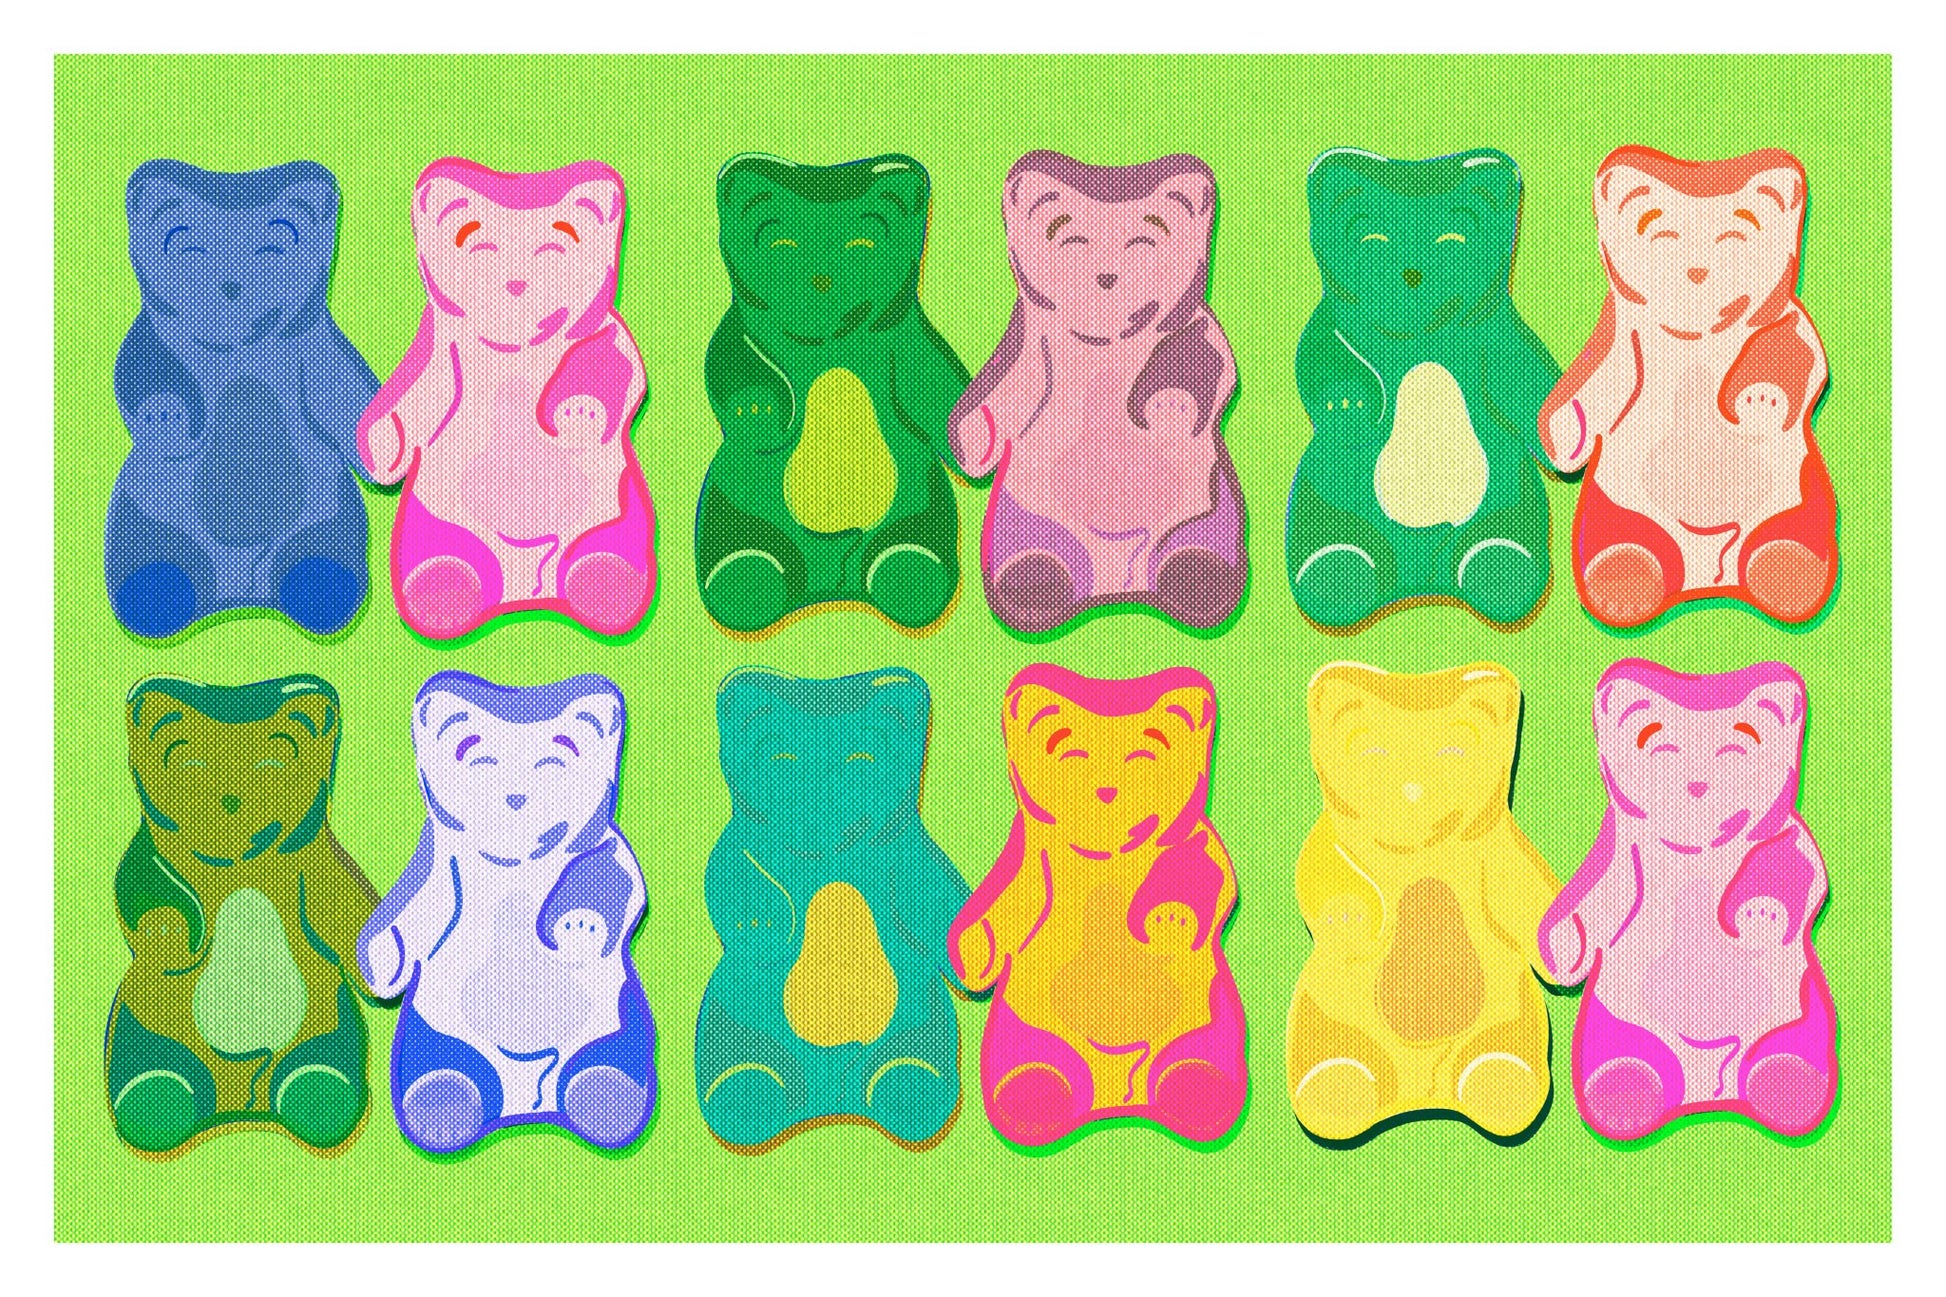 Armed and Delicious Gummy Bear Print, 12 flavors holding hands with a Green background